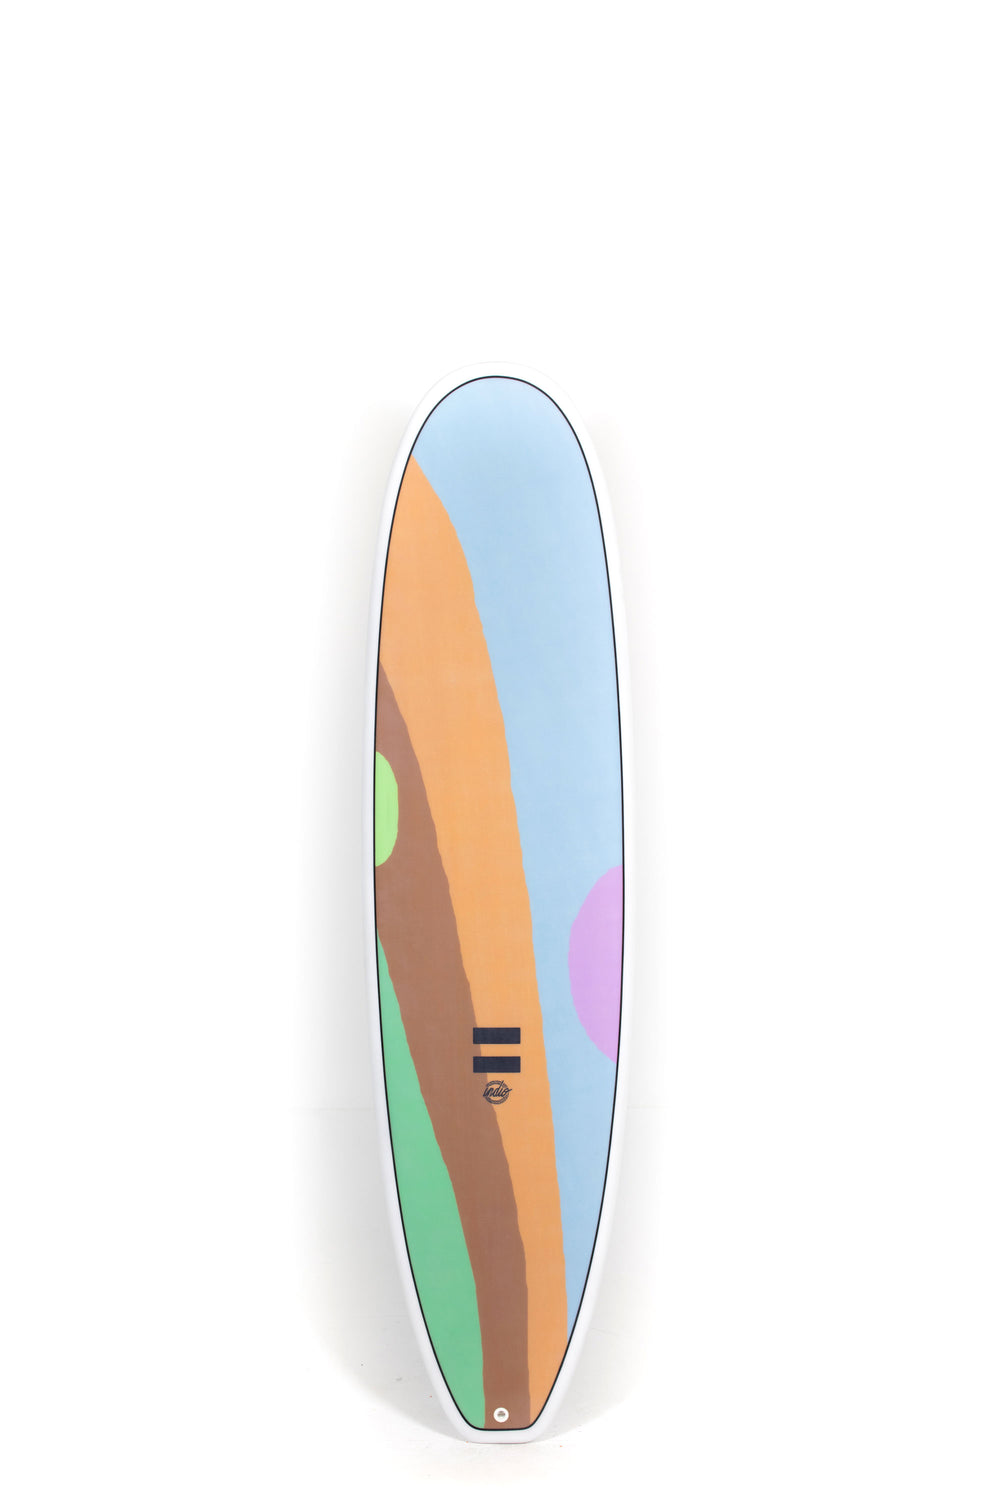 Pukas Surf Shop -  Indio Surfboards - MID LENGTH India 2 - 7'0